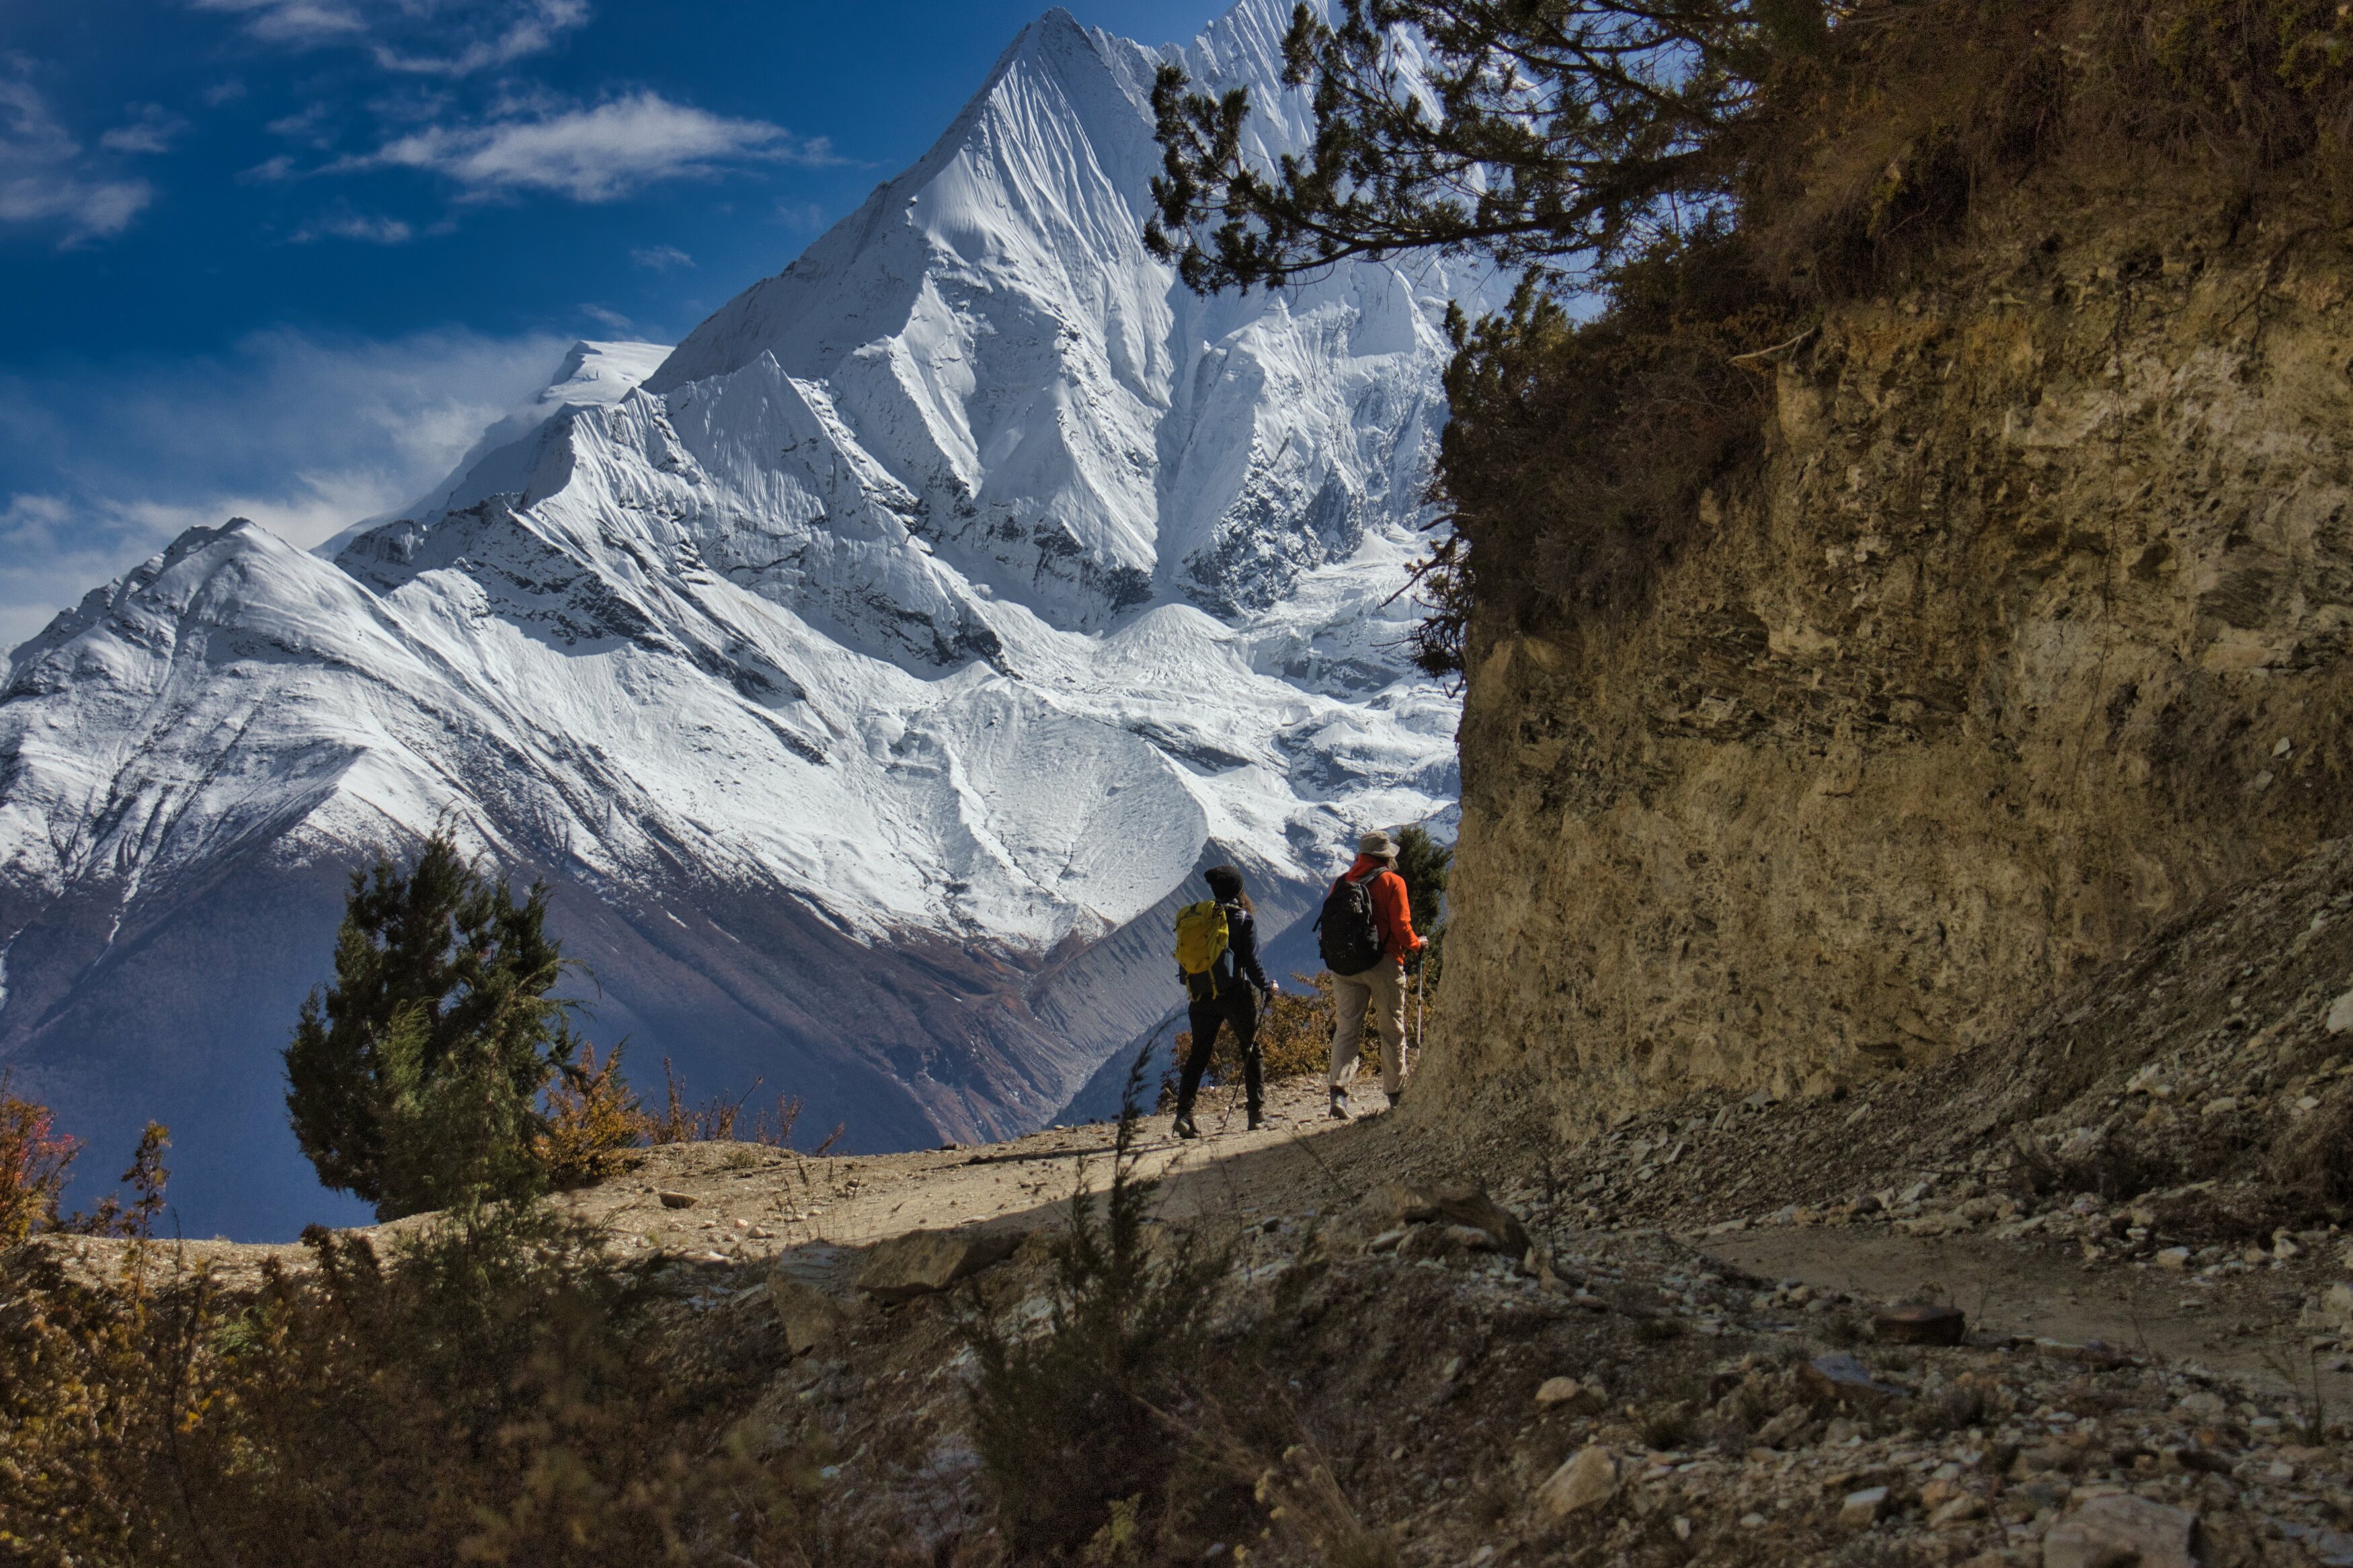 India, Himalayas, Nature, Forest, Adventure, Mountain, Snow, Ice, Journey, Landscape, Clouds, Sky, Travel, Stone, Cold, Pilgrim, Outdoors, Hiking, Uncultivated, Peak, Tibet, altitude, clear, glacier, himalayan, powerful, wild, cliff, famous, high, landmar, Raimond Klavins